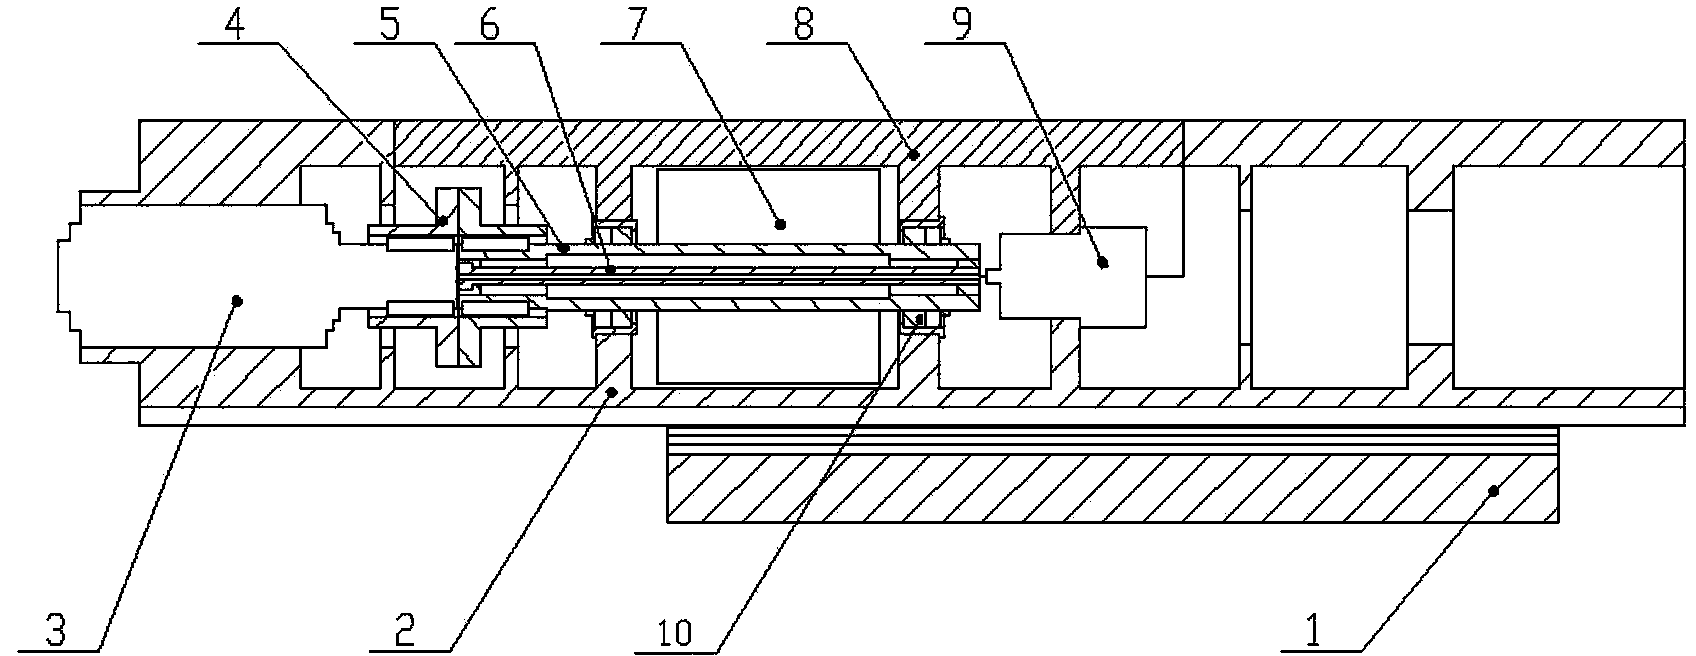 Ram component on processing machine tool